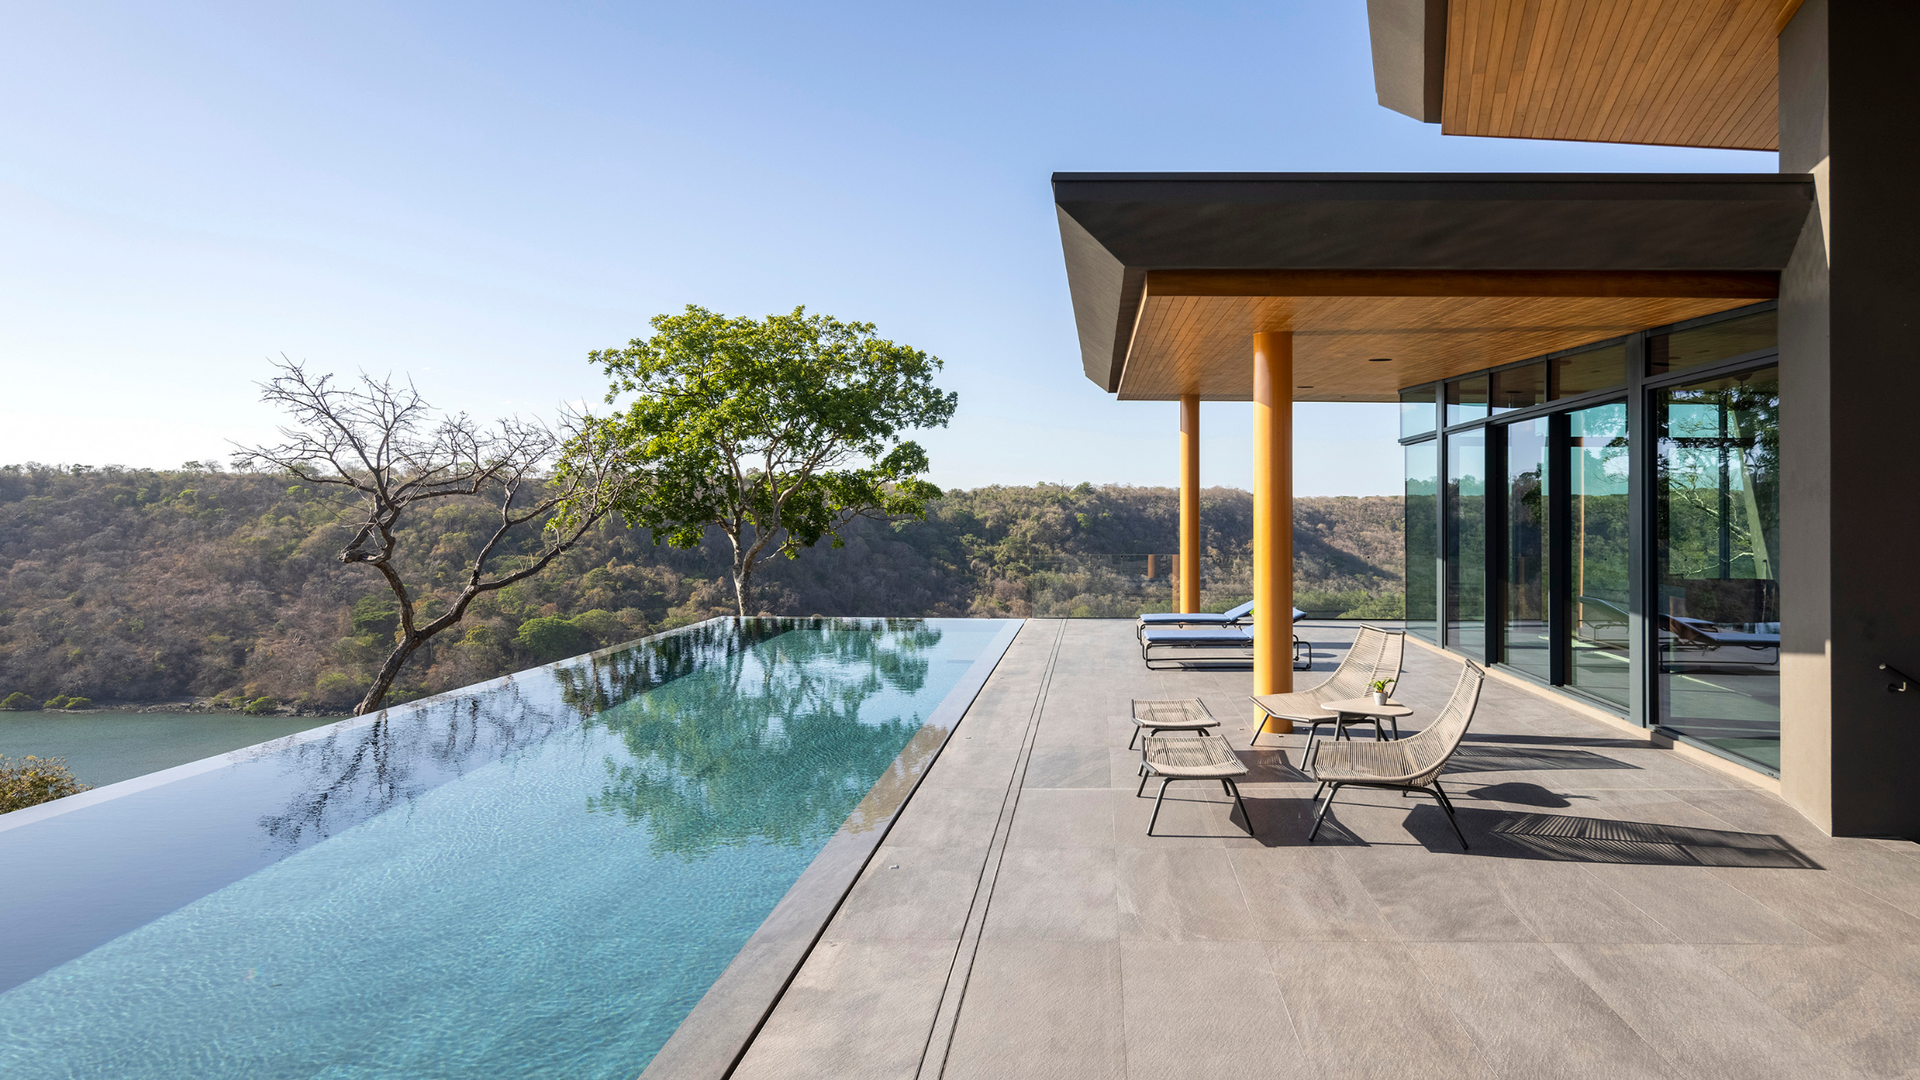 A private jet is flying over an infinity pool in front of a luxury house by Sarco Architects